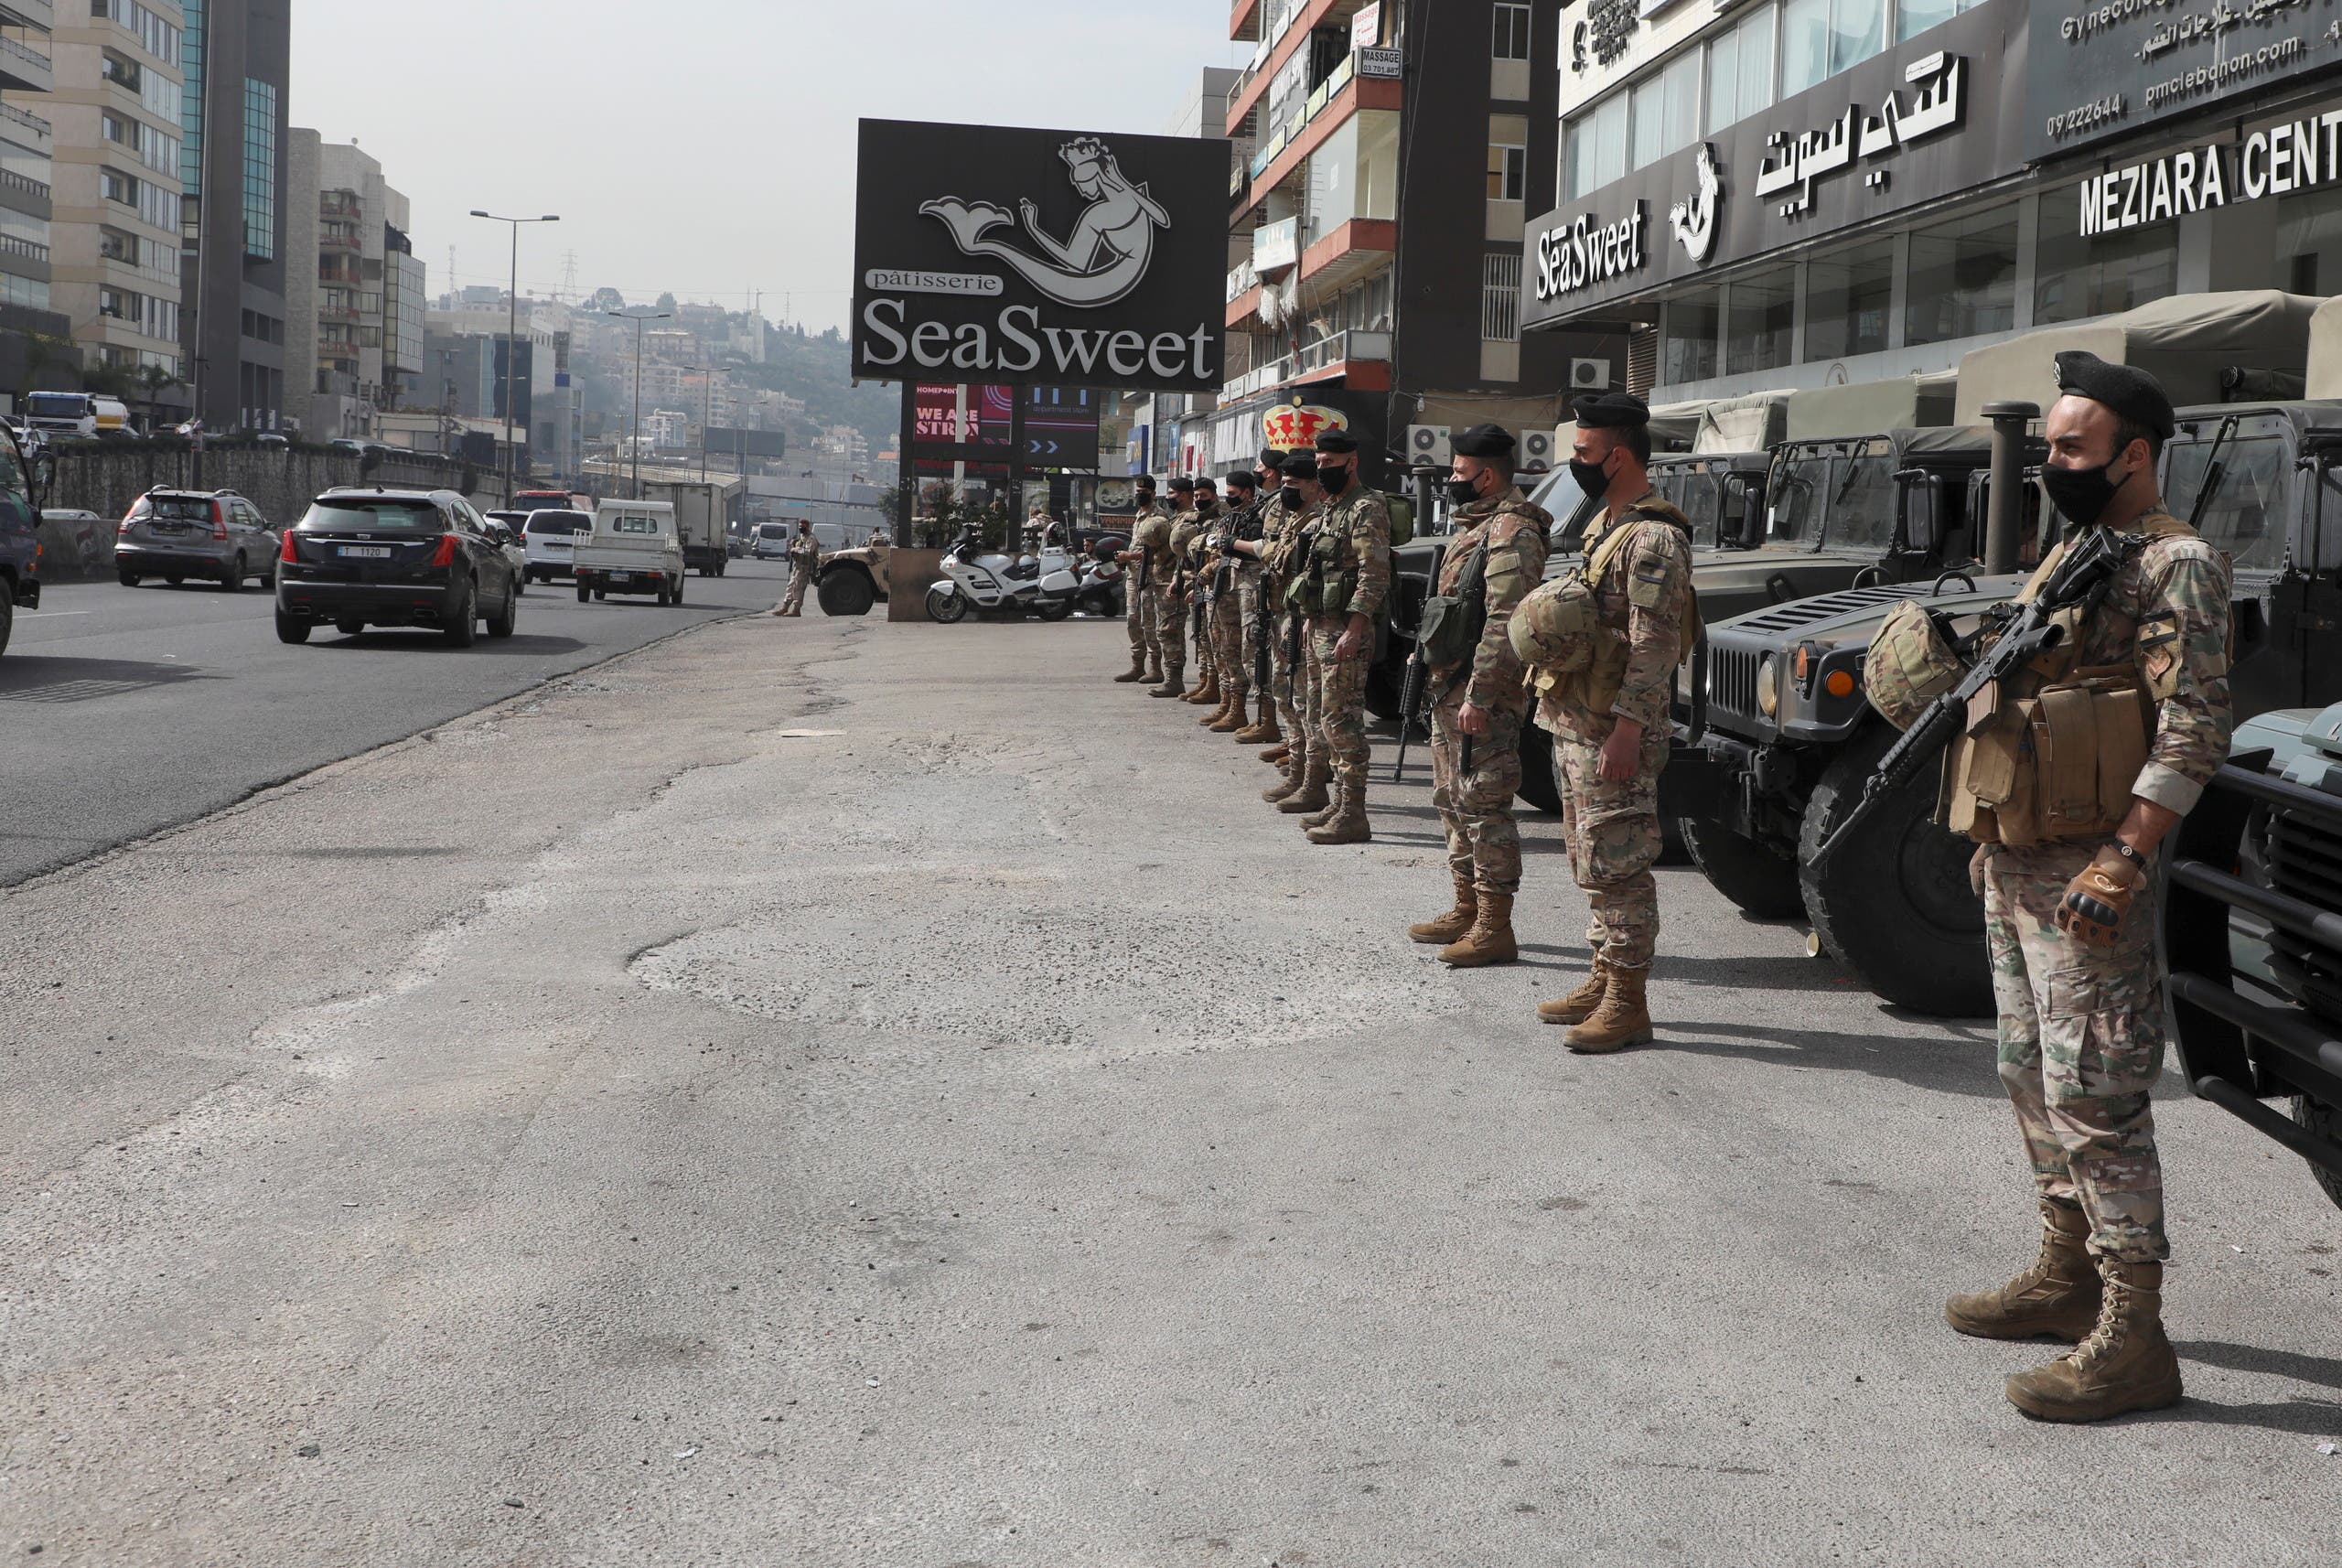 Lebanese army soldiers stand together as they are deployed in Zouk, Lebanon March 10, 2021. (Reuters)